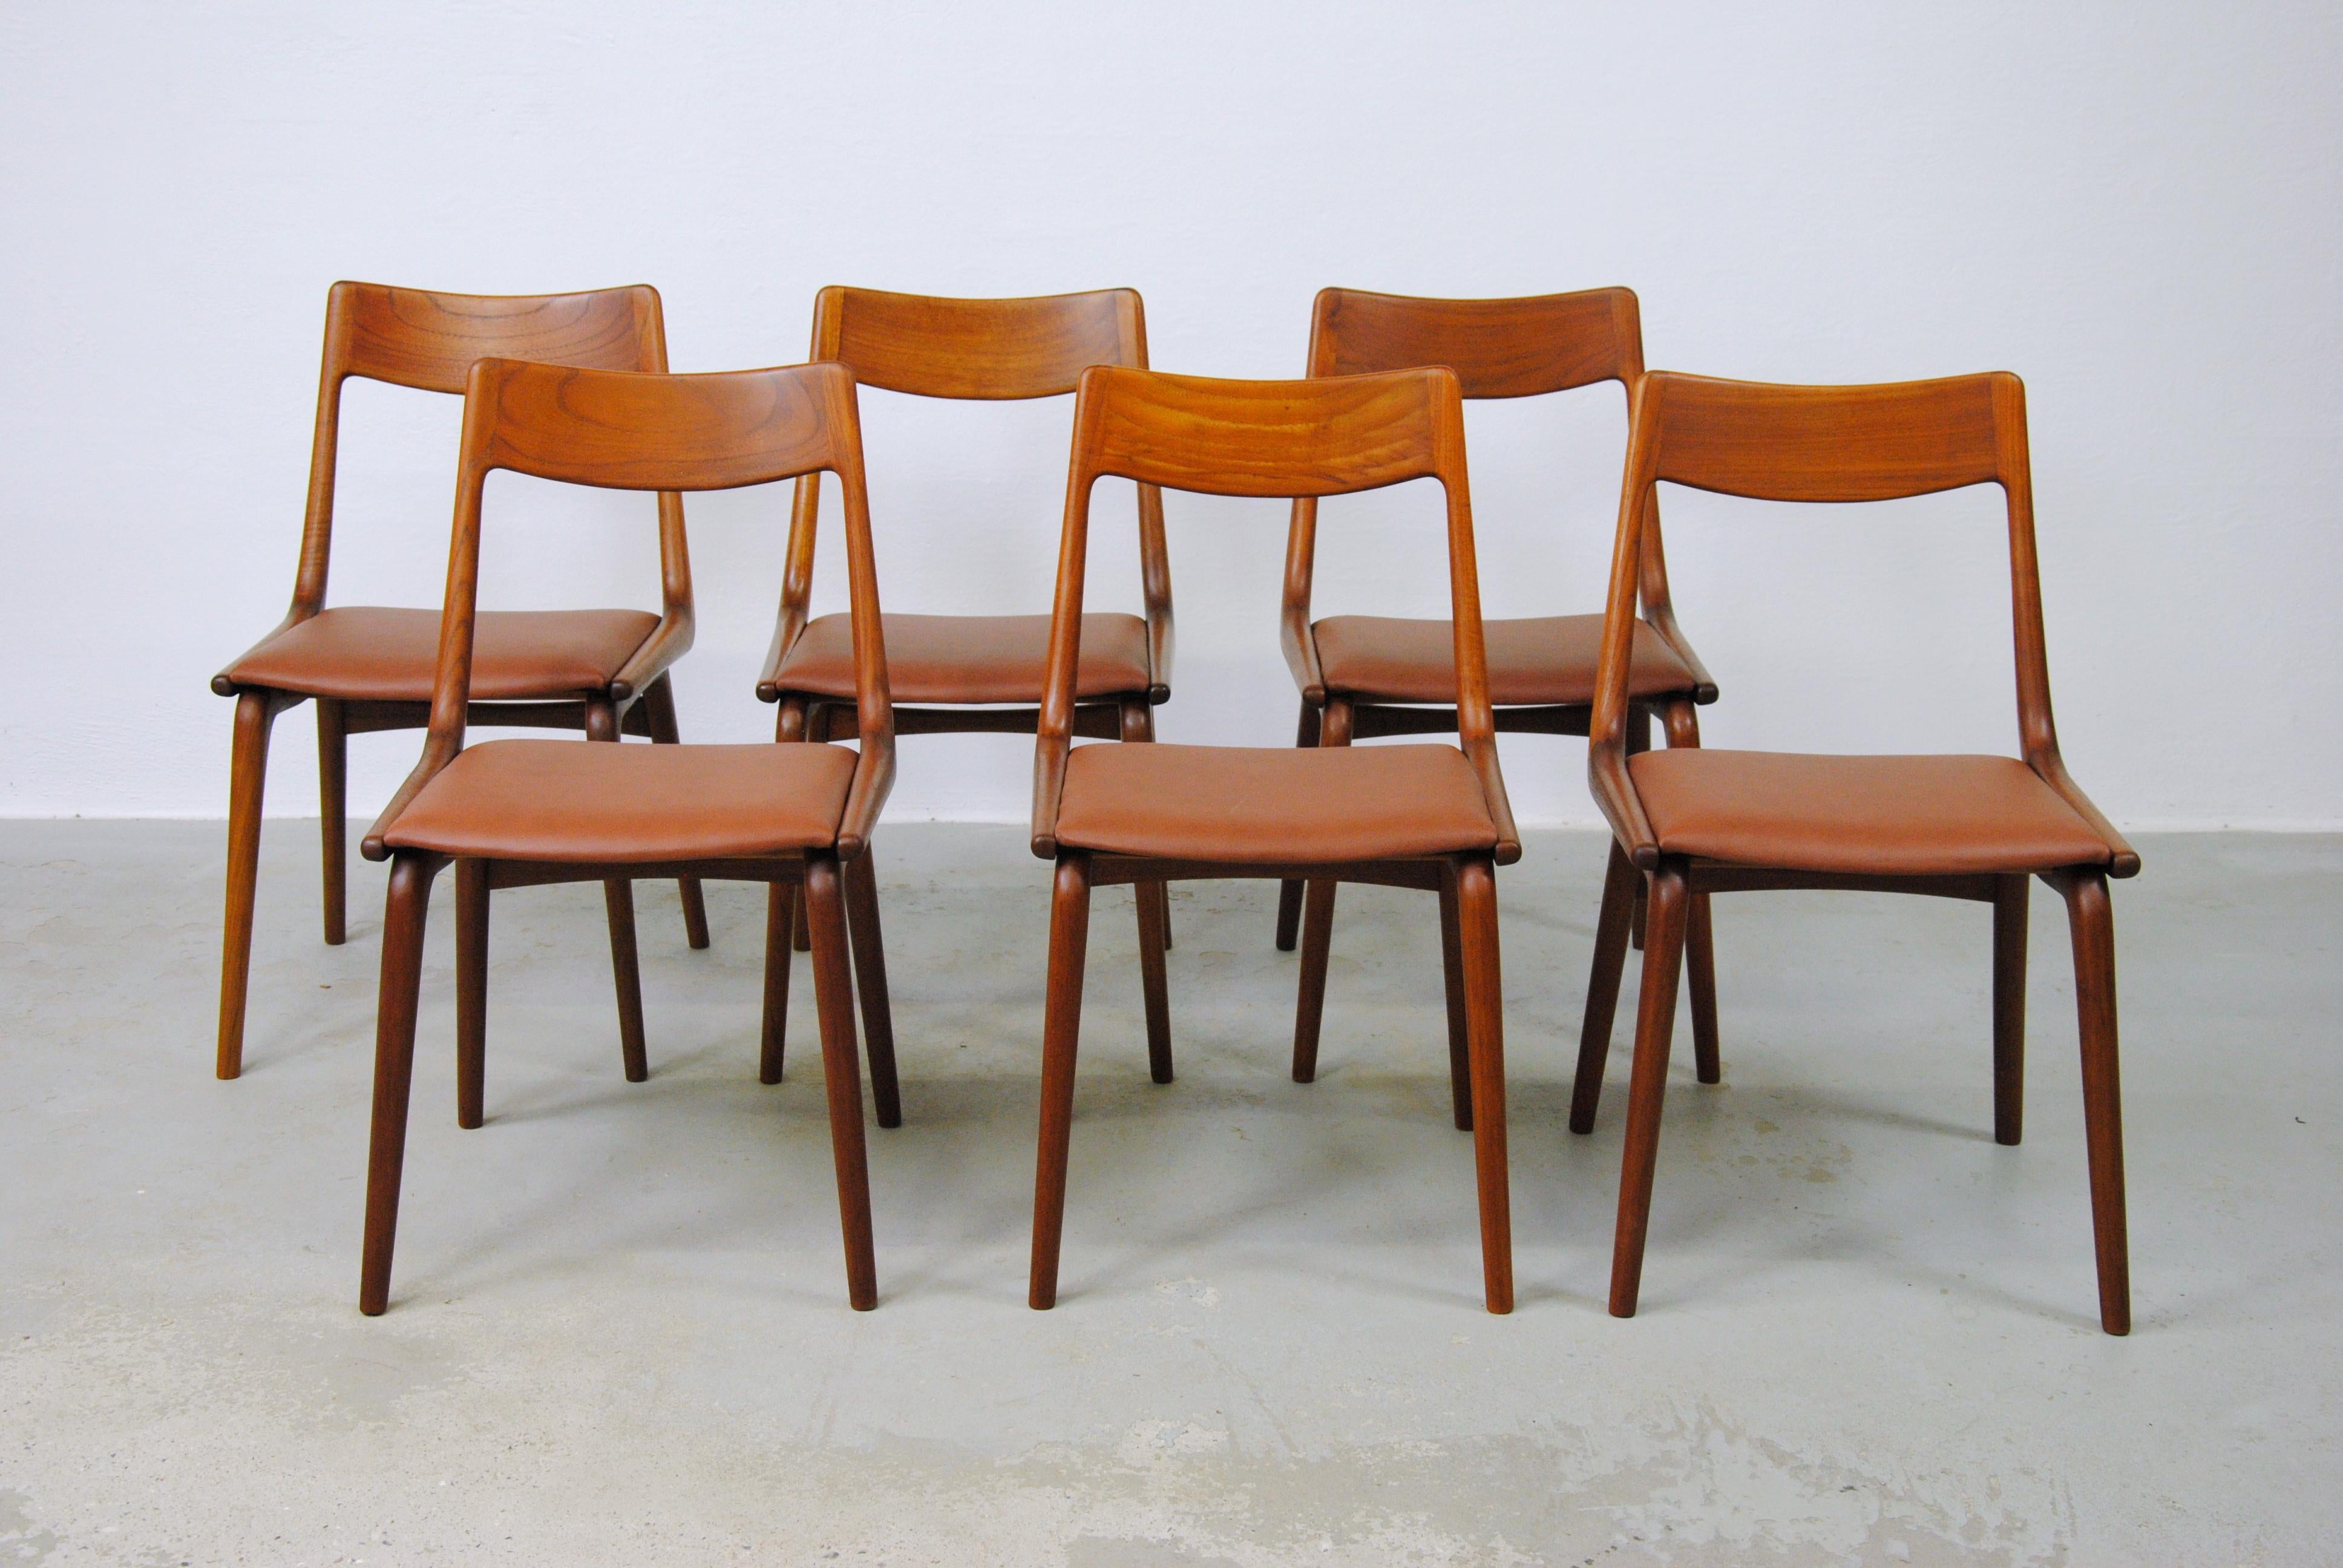 Set of six 1950s Danish boomerang dining chairs in teak by Alfred Christensen for Slagelse Møbelfabrik.

The comfortable chairs feature a simple but elegant boomerang shaped frame in solid bended teak with a well shaped teak backrest and a very